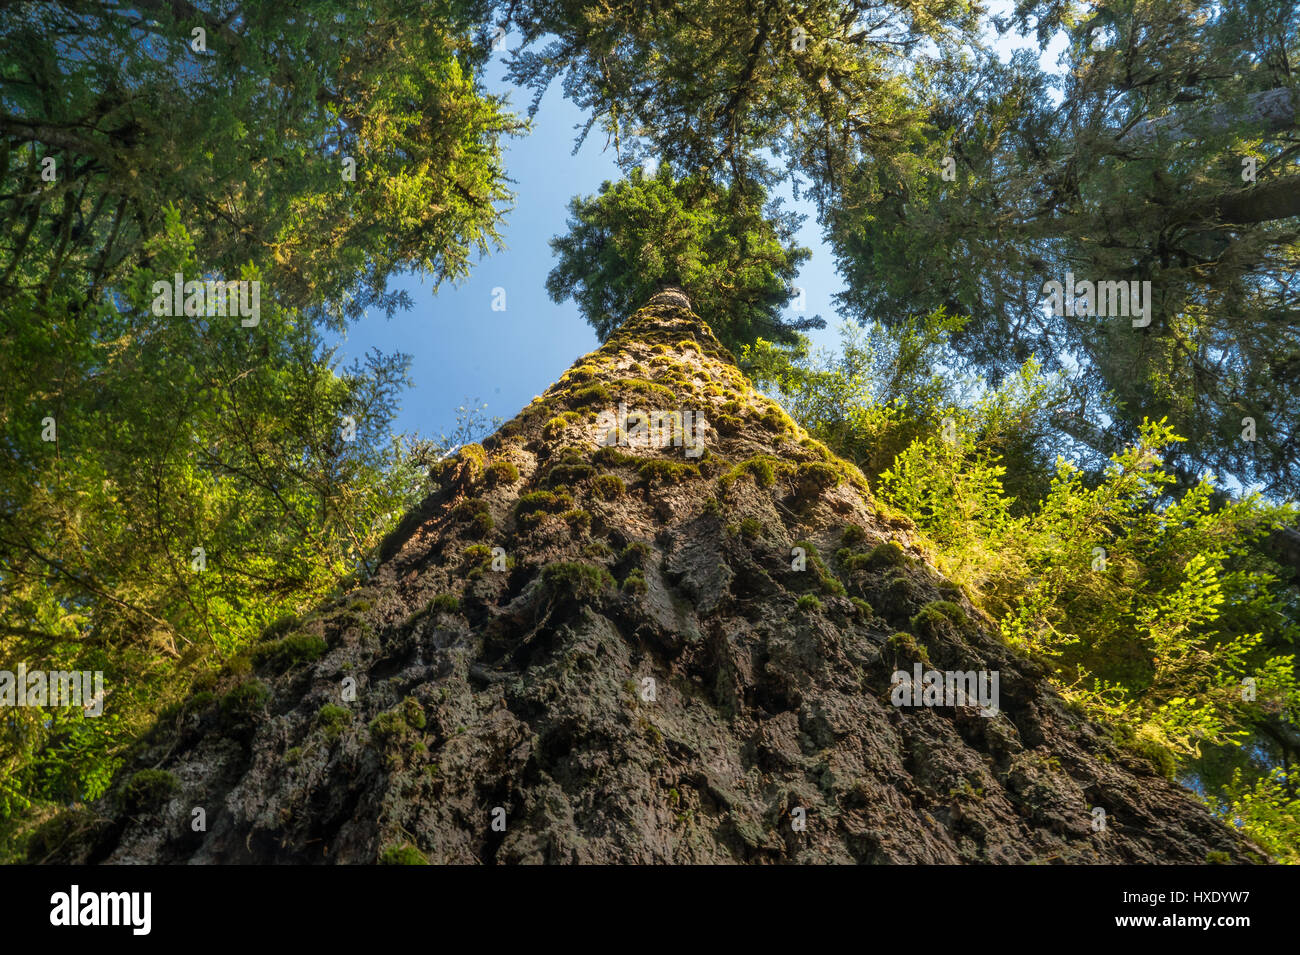 Giant Western  Hemlock in the Hoh Rainforest of Olympic National Park Stock Photo